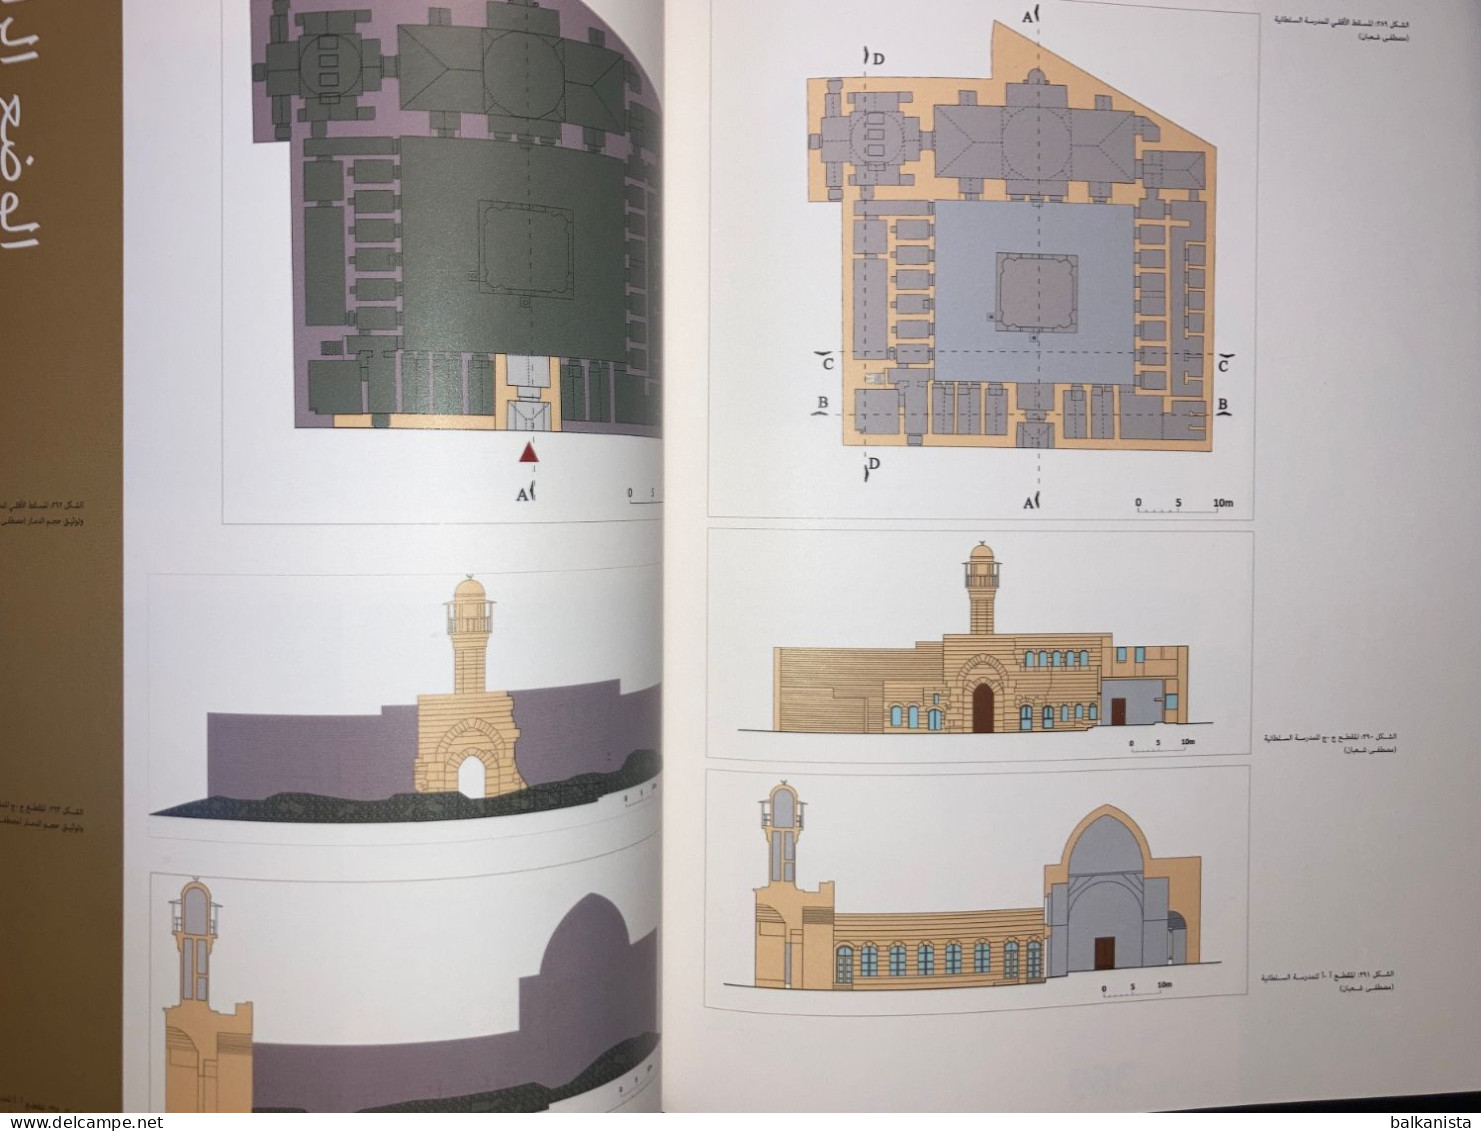 City of Aleppo And Its Traditional Houses - Arabic Syria Illustrated